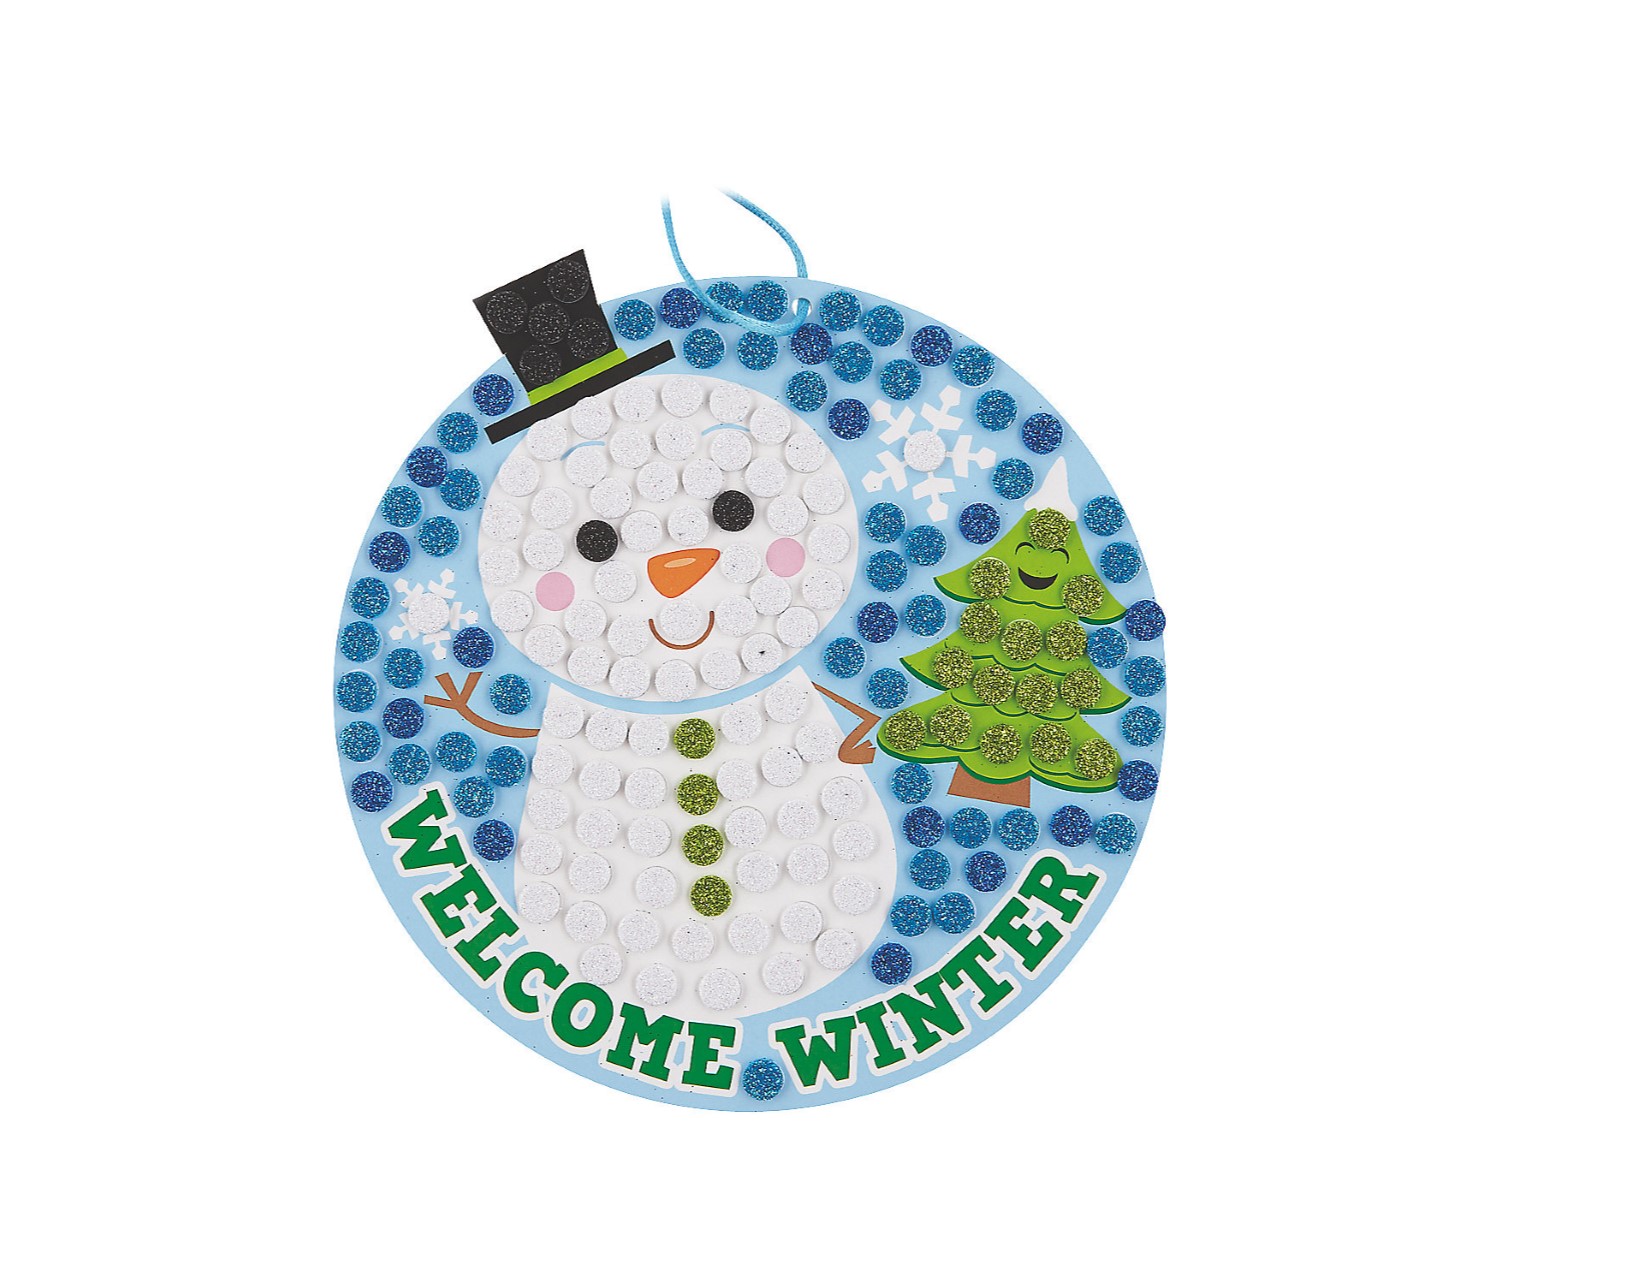 glitter snowman with black and green hat in a circle of blue dots and snowflakes and a green tree. sign saying welcome winter